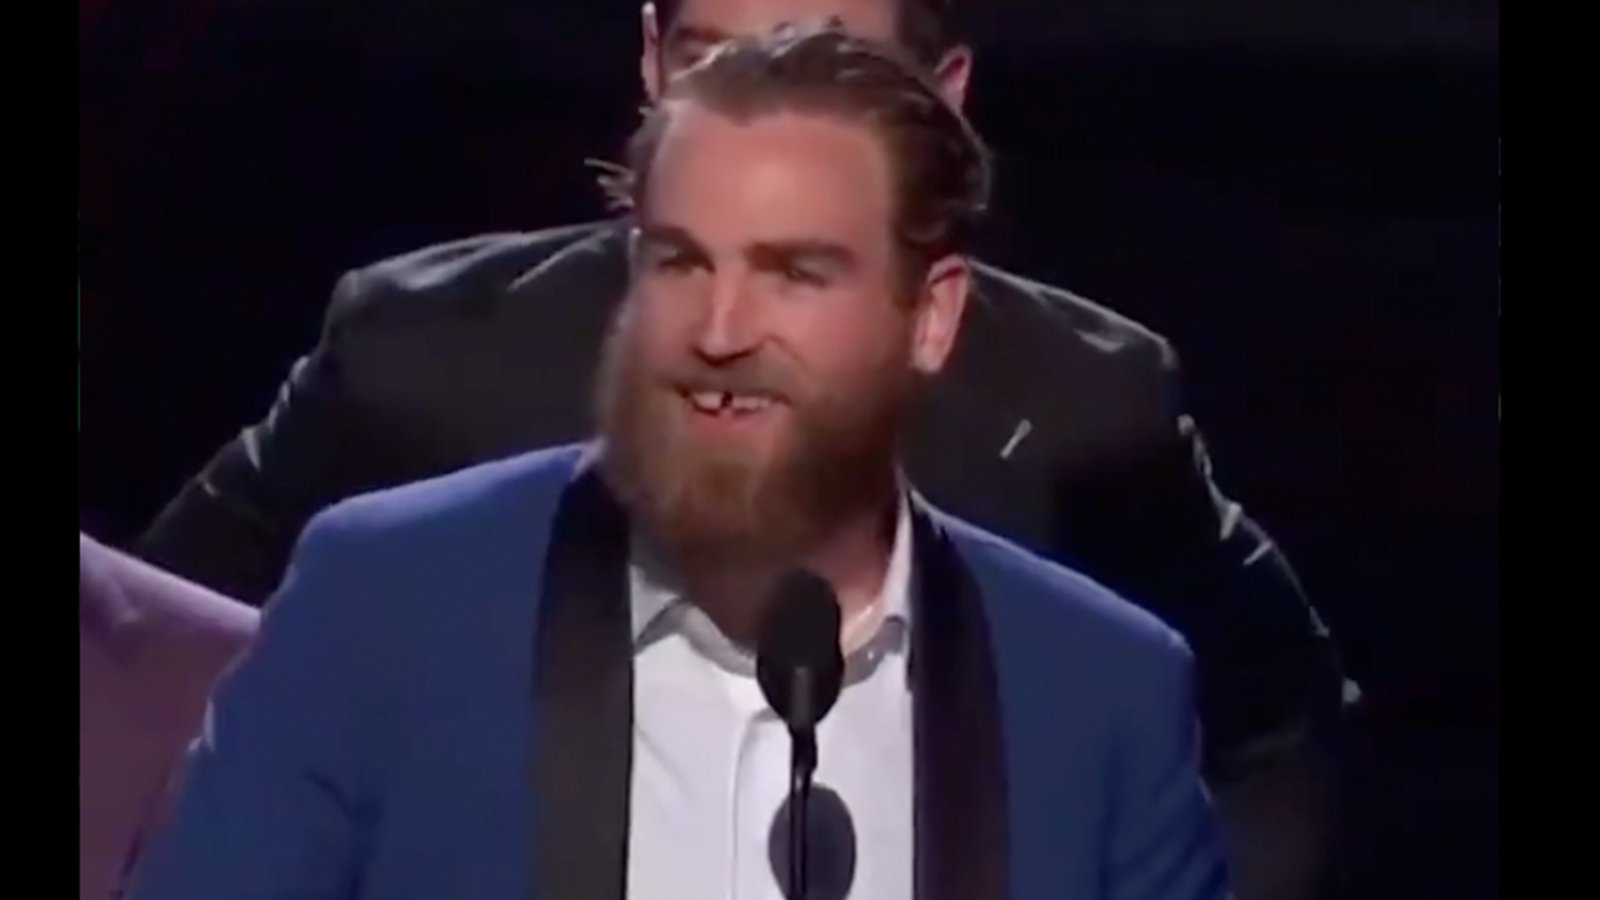 Ryan O’Reilly removes his teeth before accepting award at the ESPY’s last night